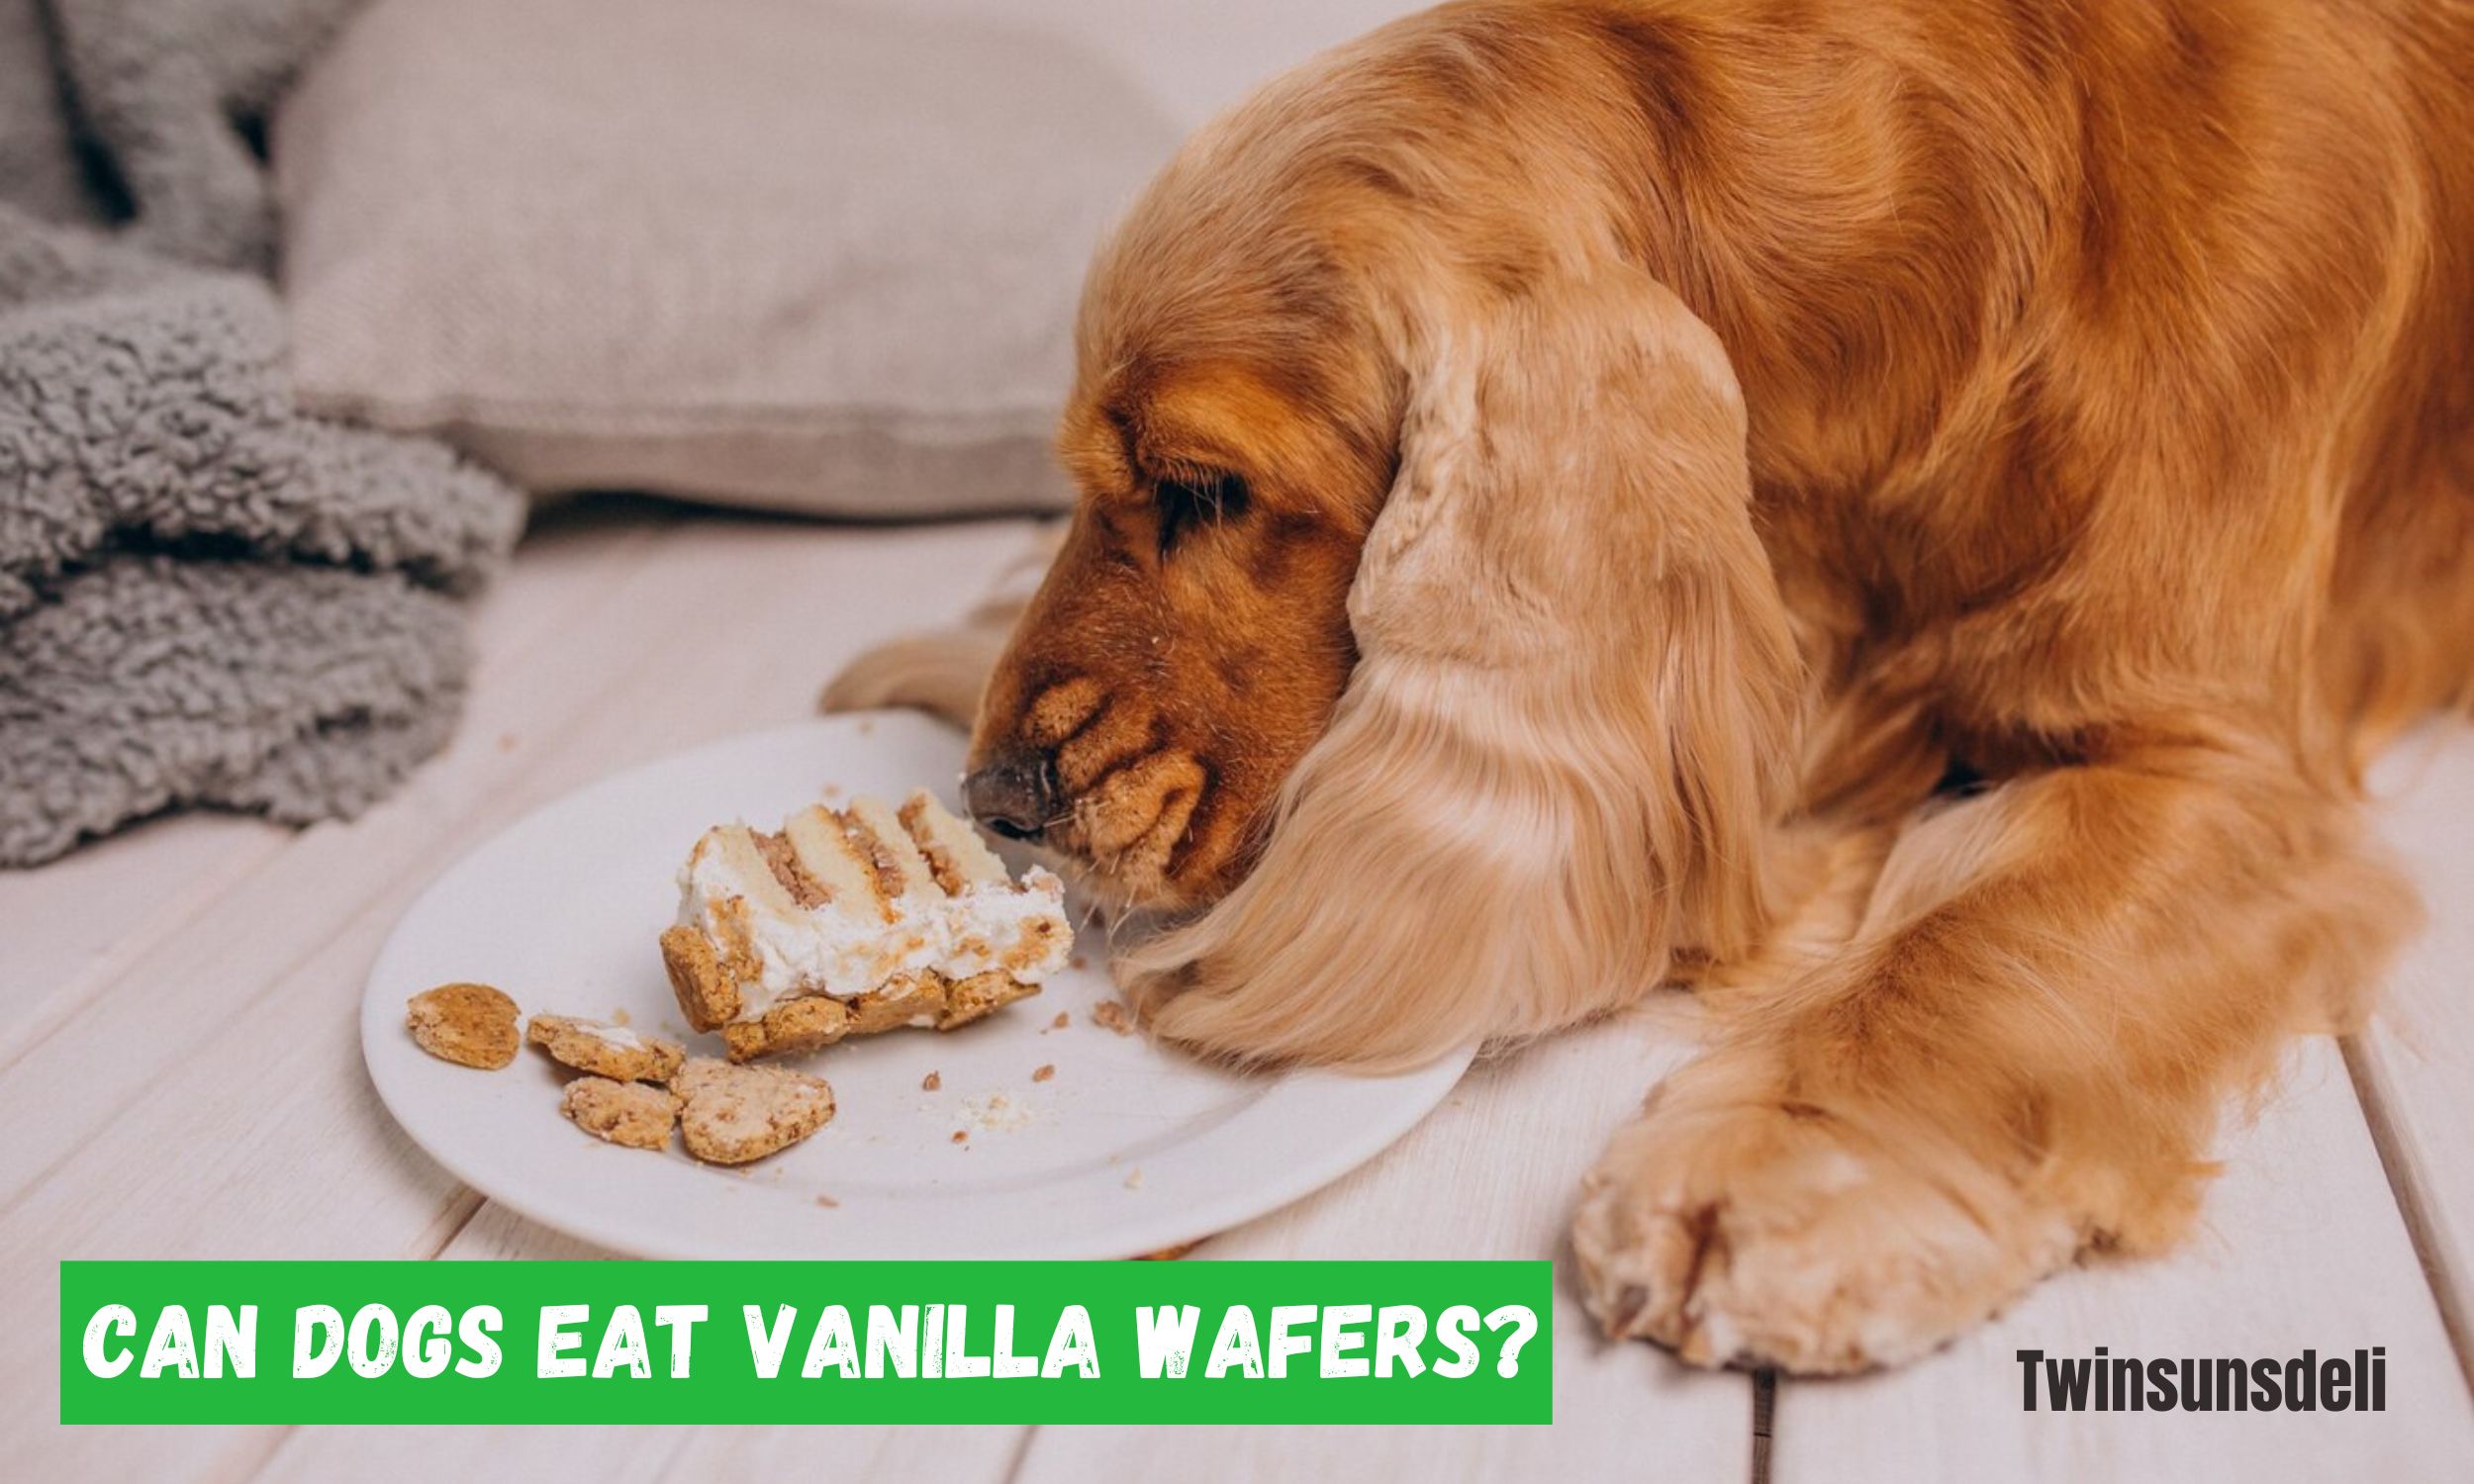 Can dogs eat vanilla wafers